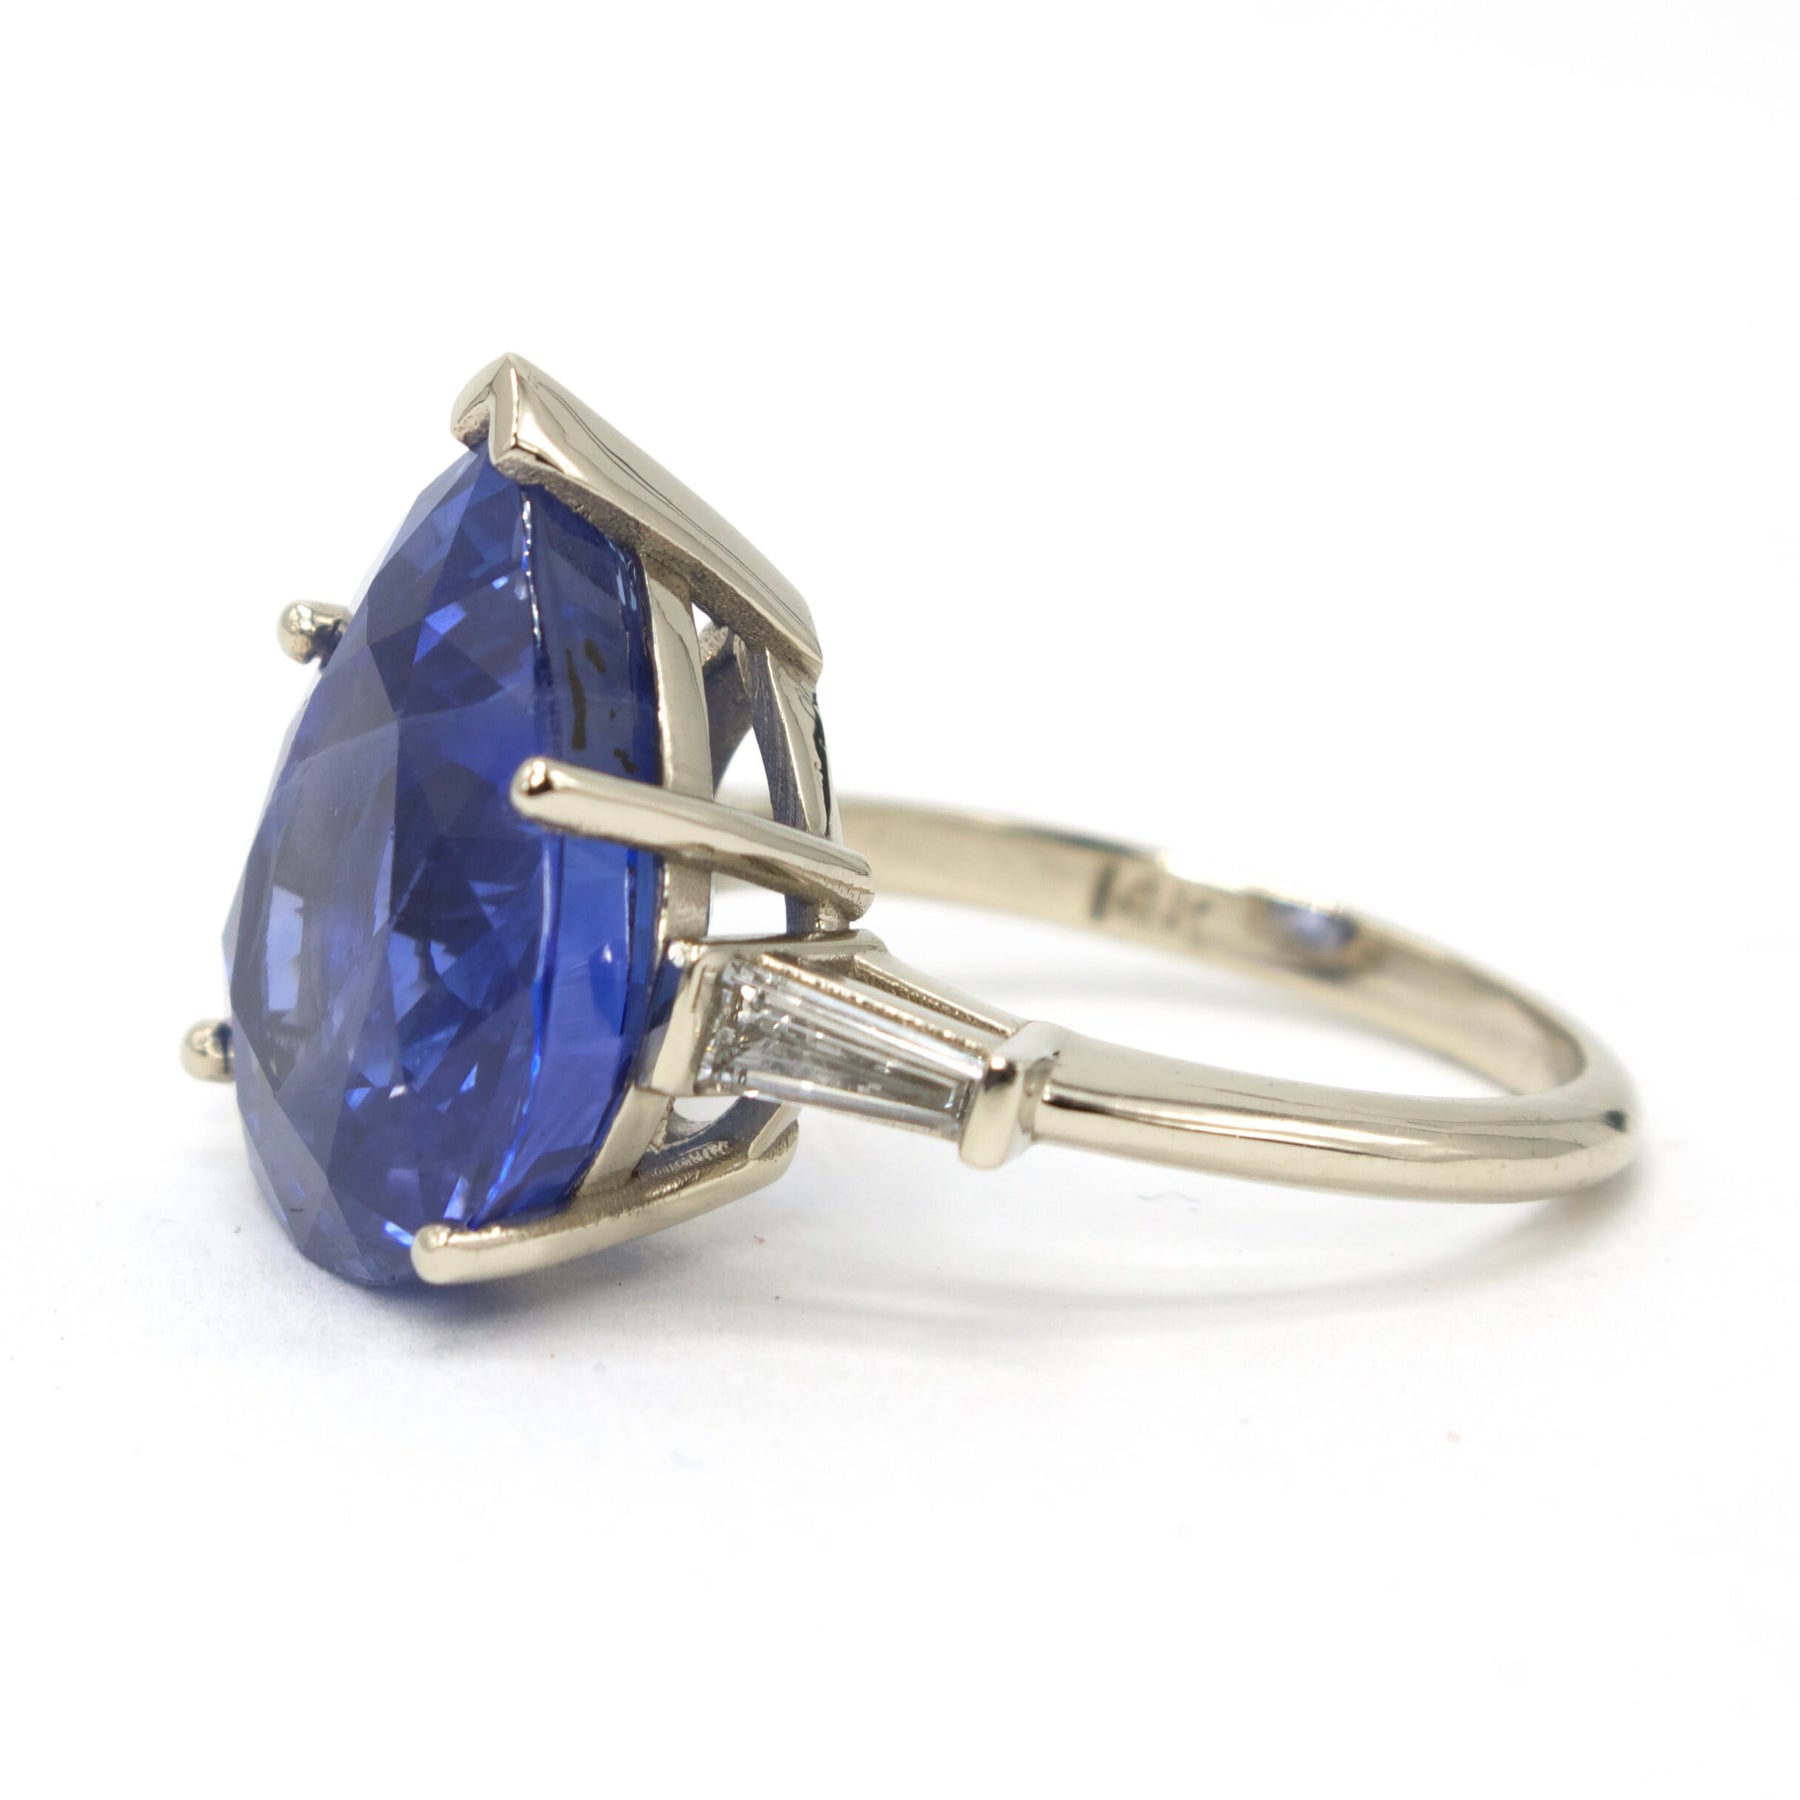 GIA Certified 12.70ct Pear Shaped Ceylon Blue Sapphire Ring with